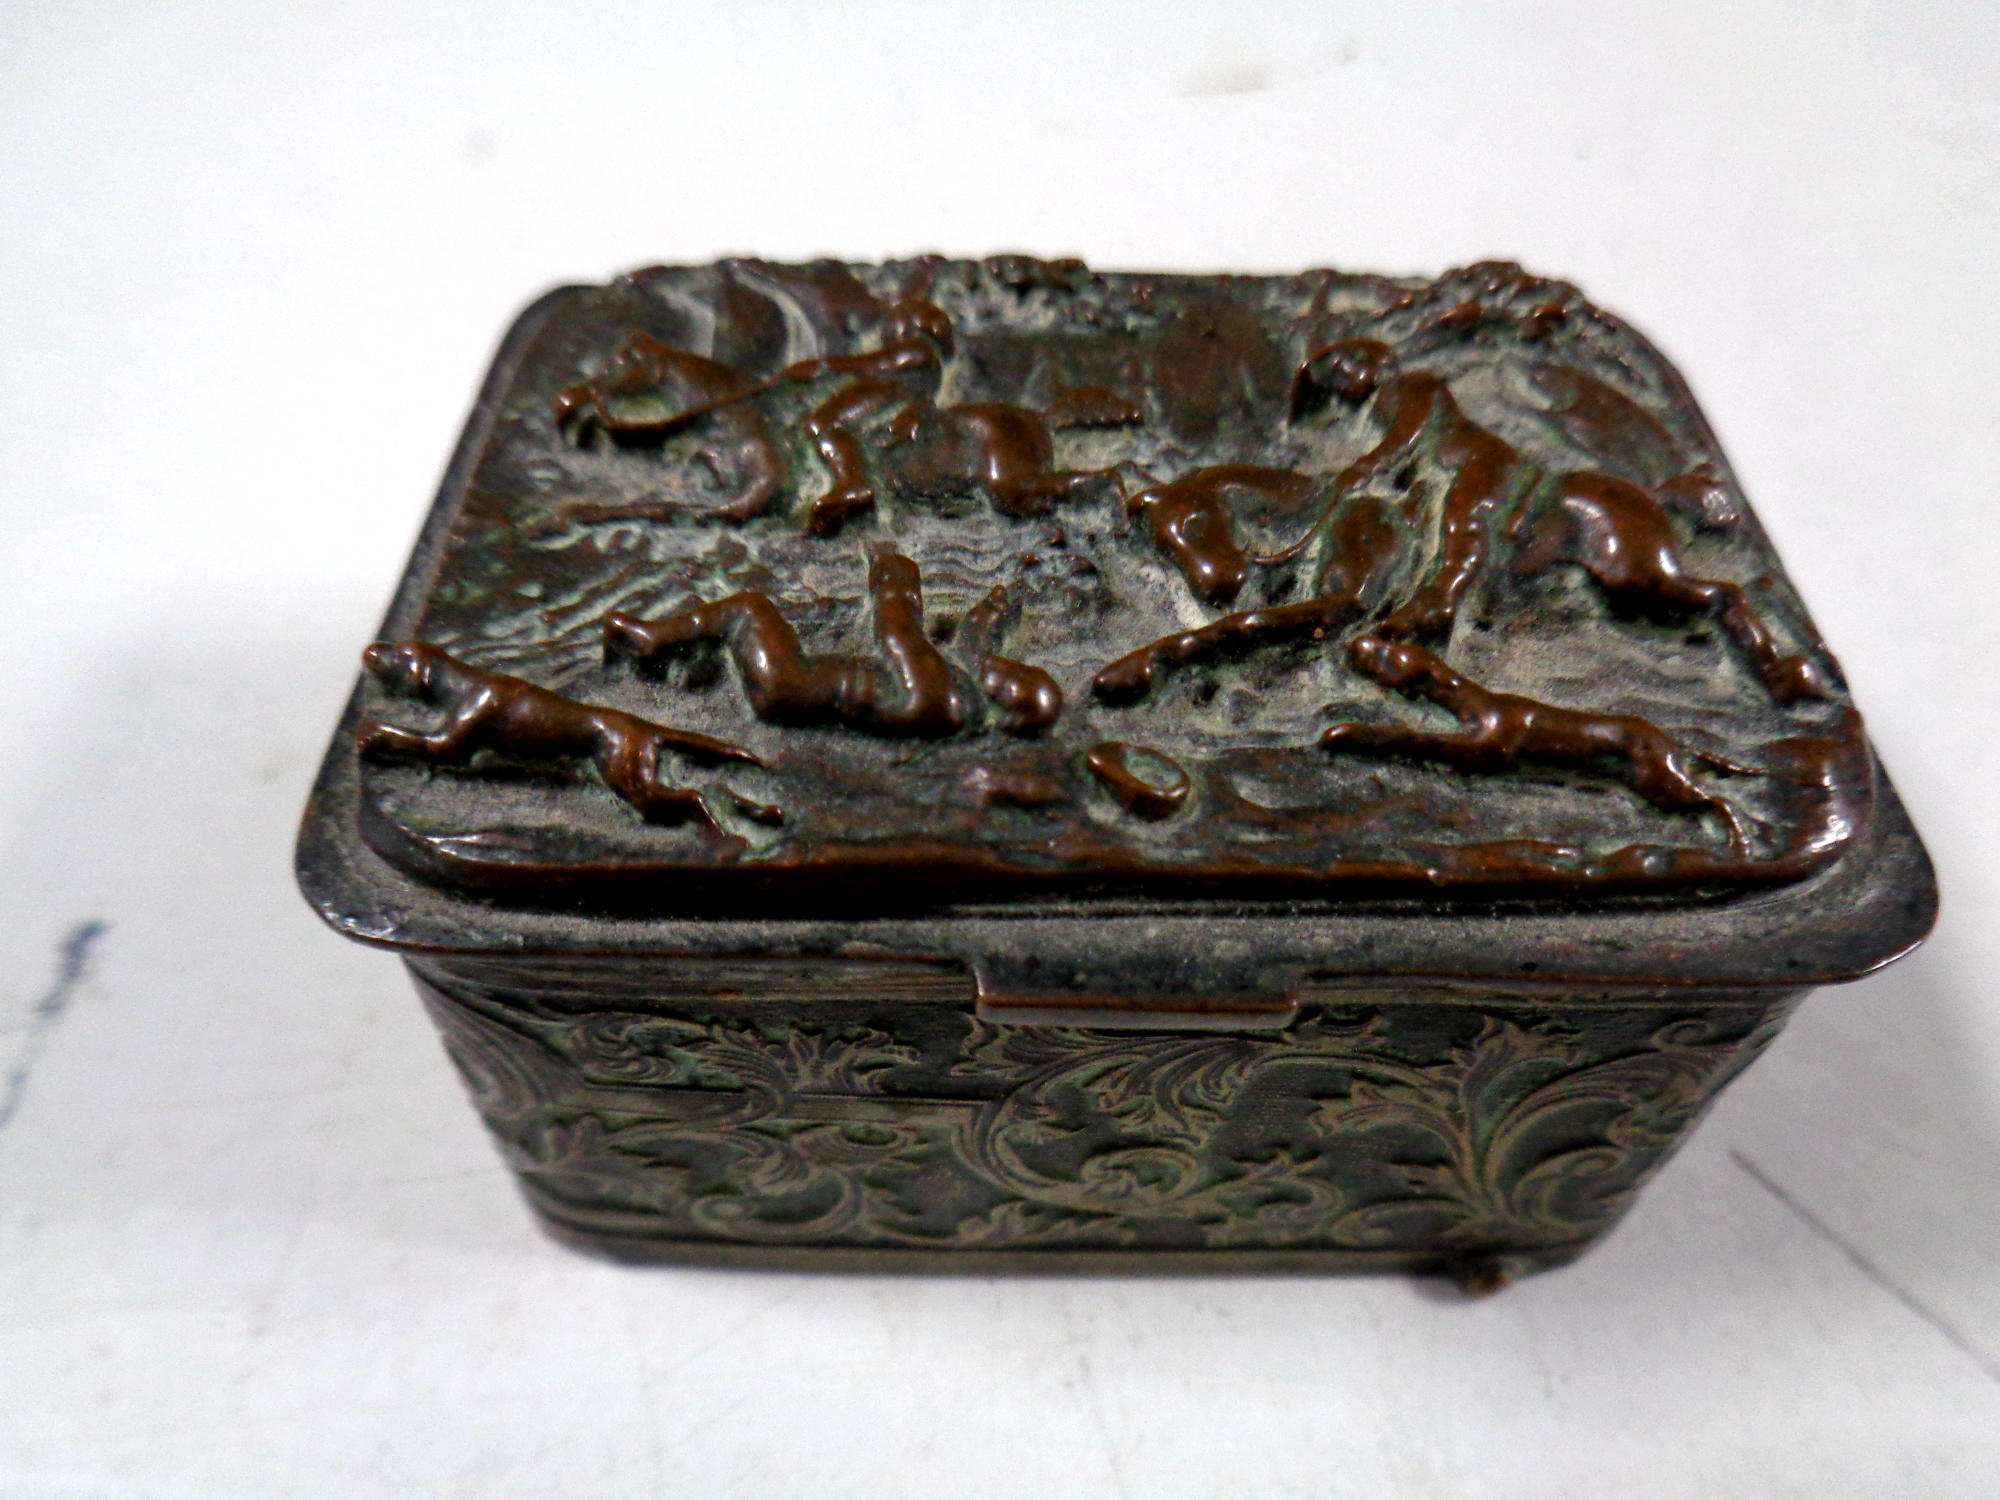 An antique plated embossed snuff box depicting a hunting scene (as found)